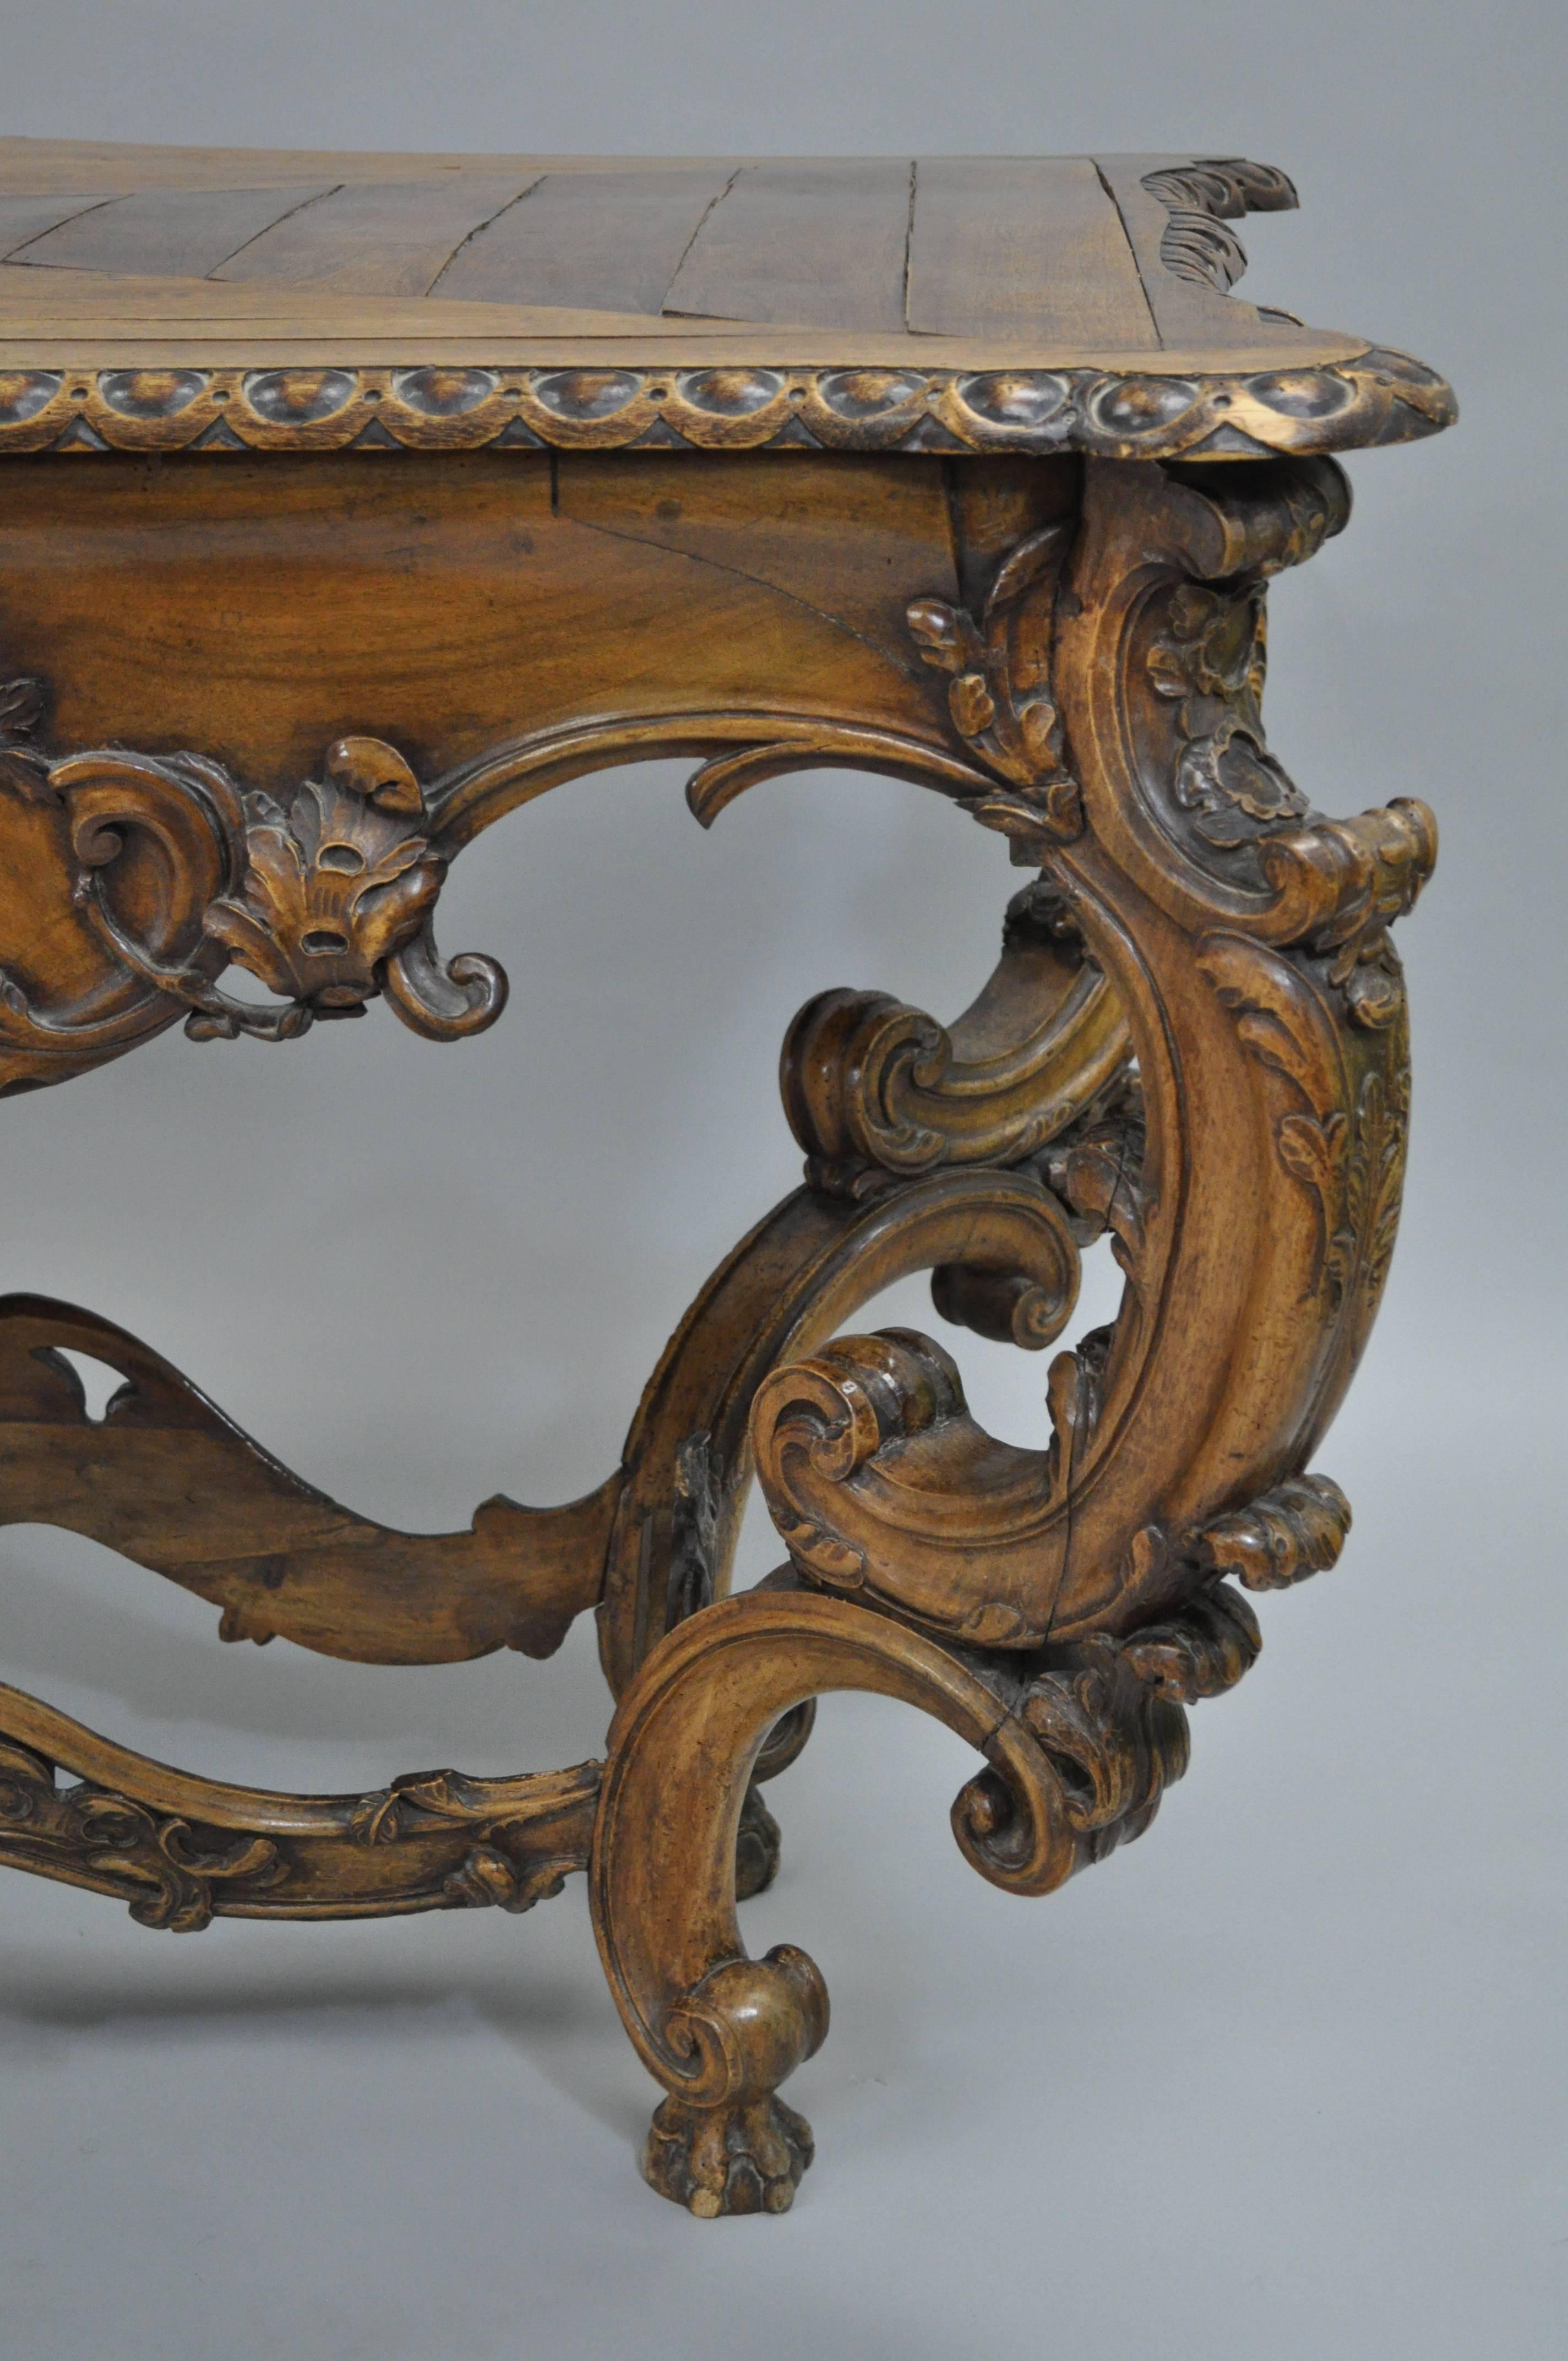 19th Century 19th C. Italian Baroque Carved Walnut Center Table in the French Louis XV Taste For Sale